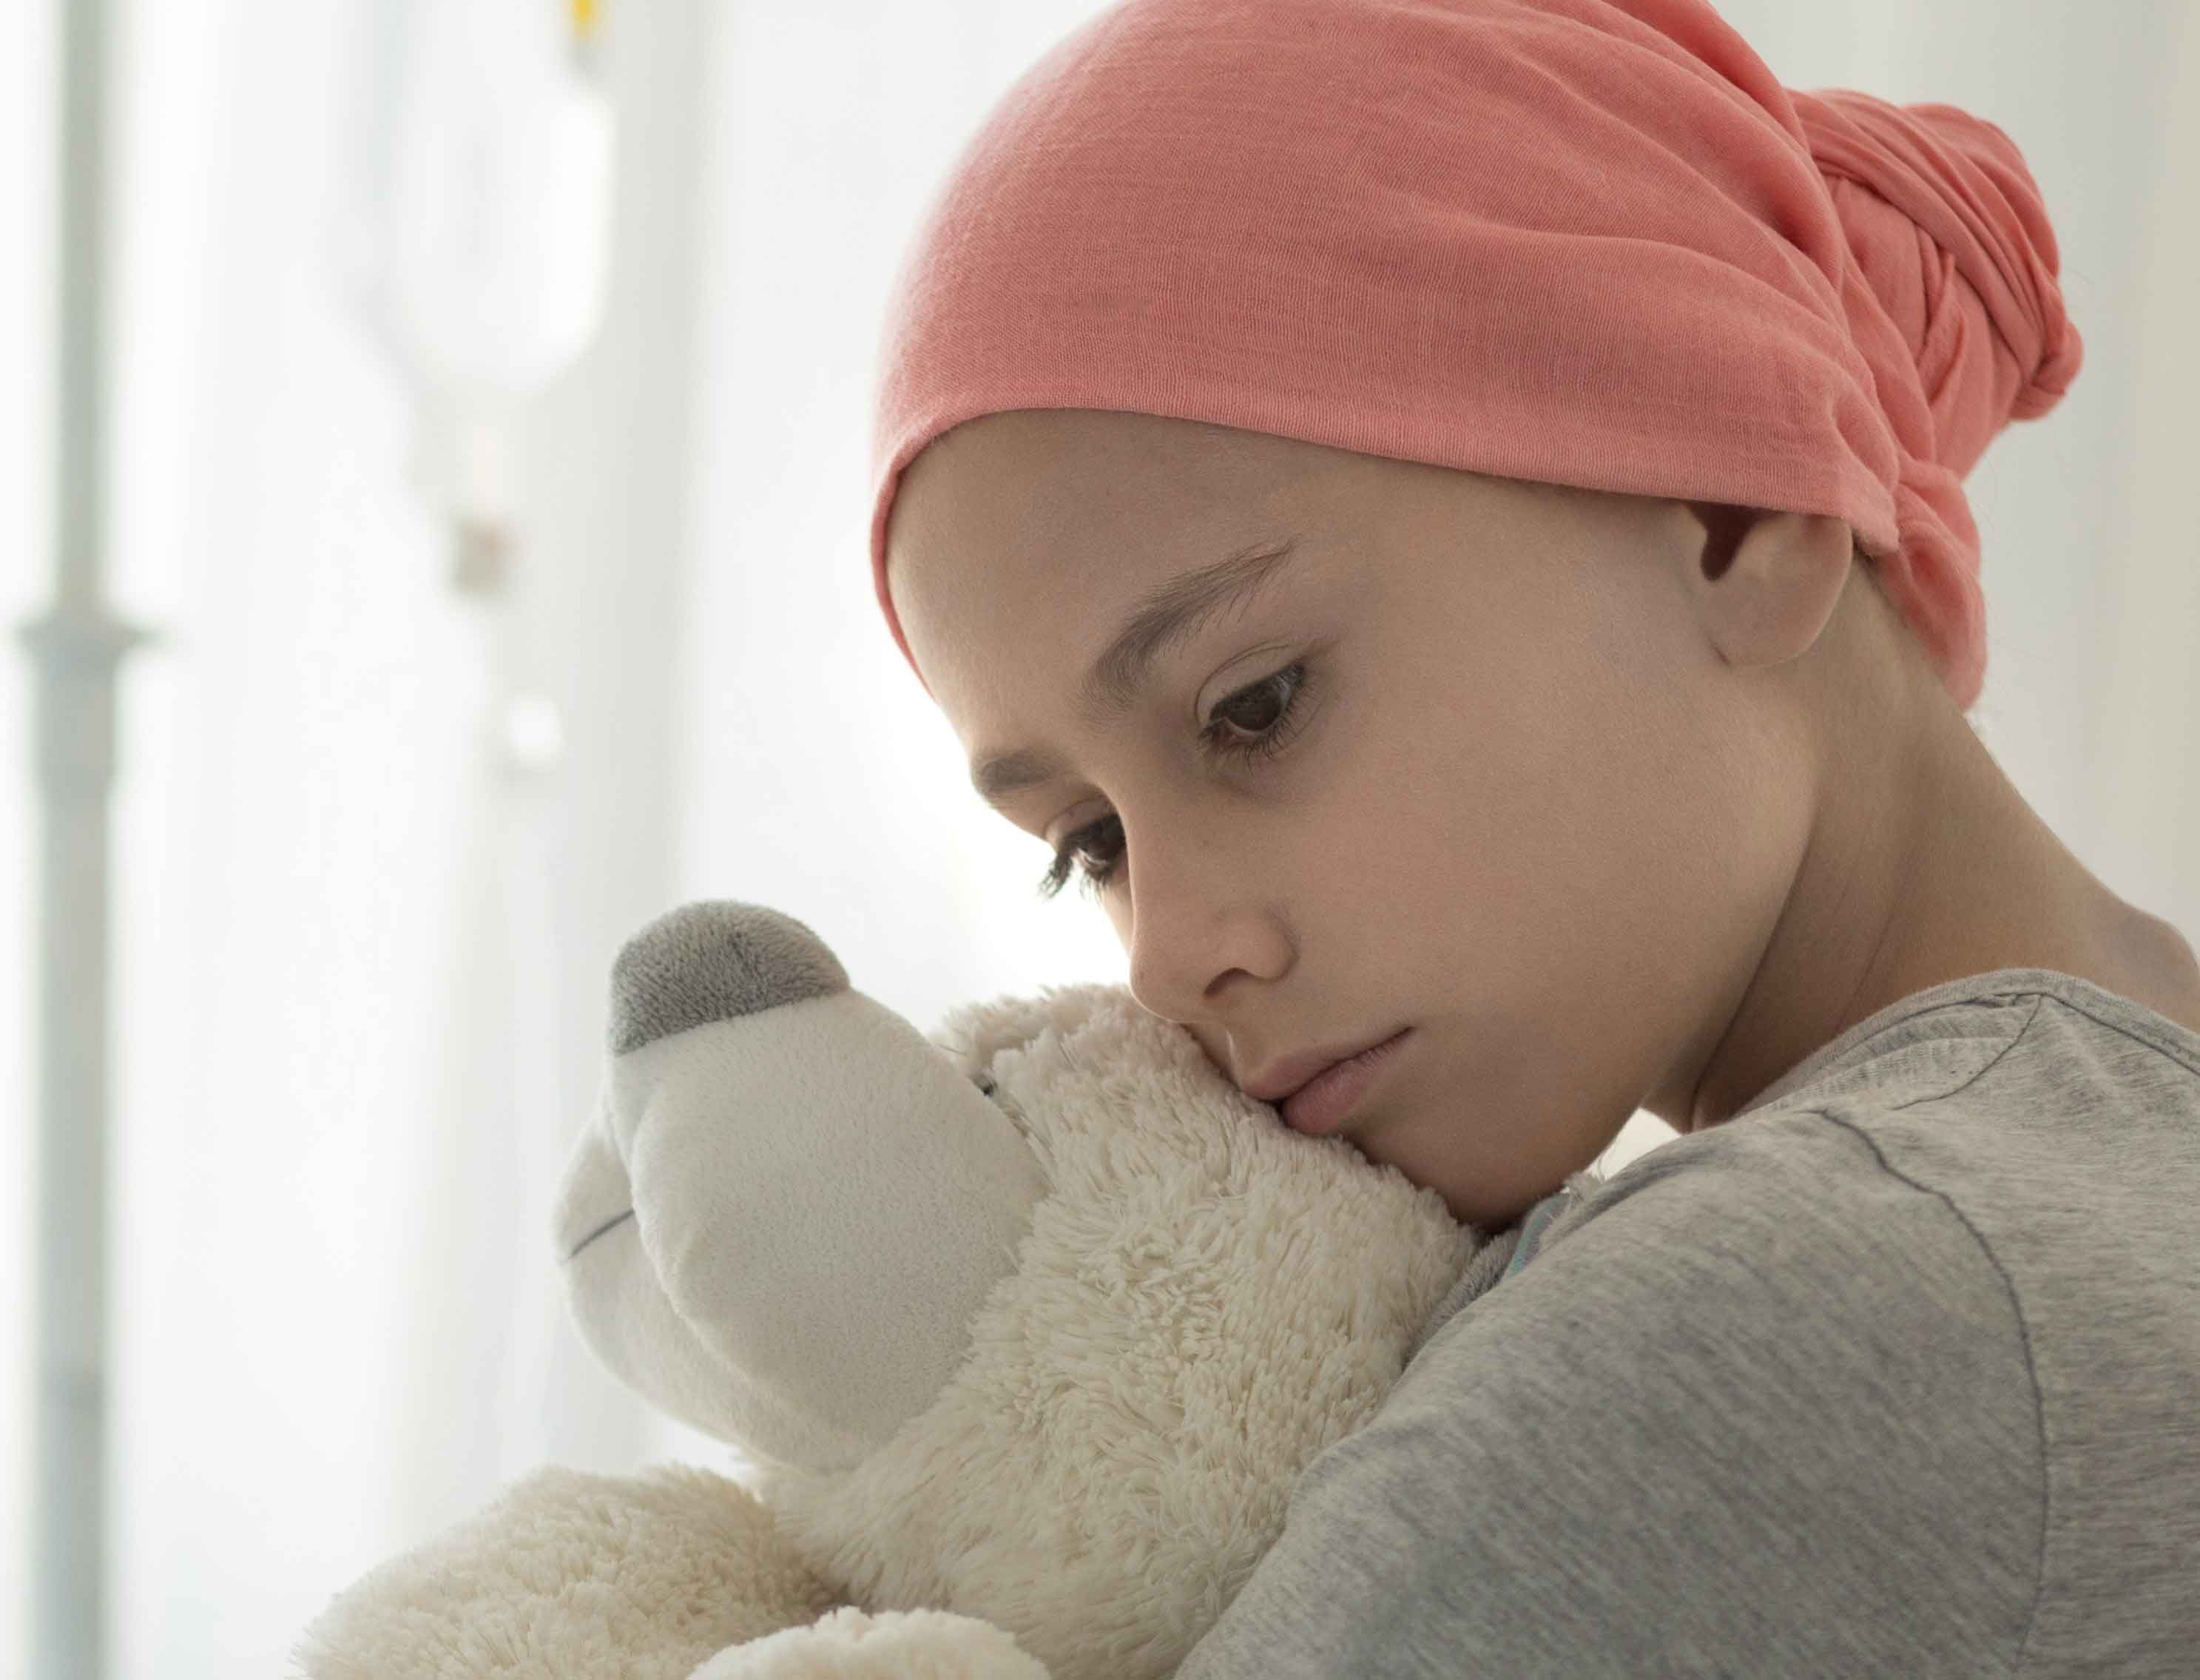 Weak girl with cancer wearing pink headscarf and hugging teddy bear -  Avalan Wealth Management